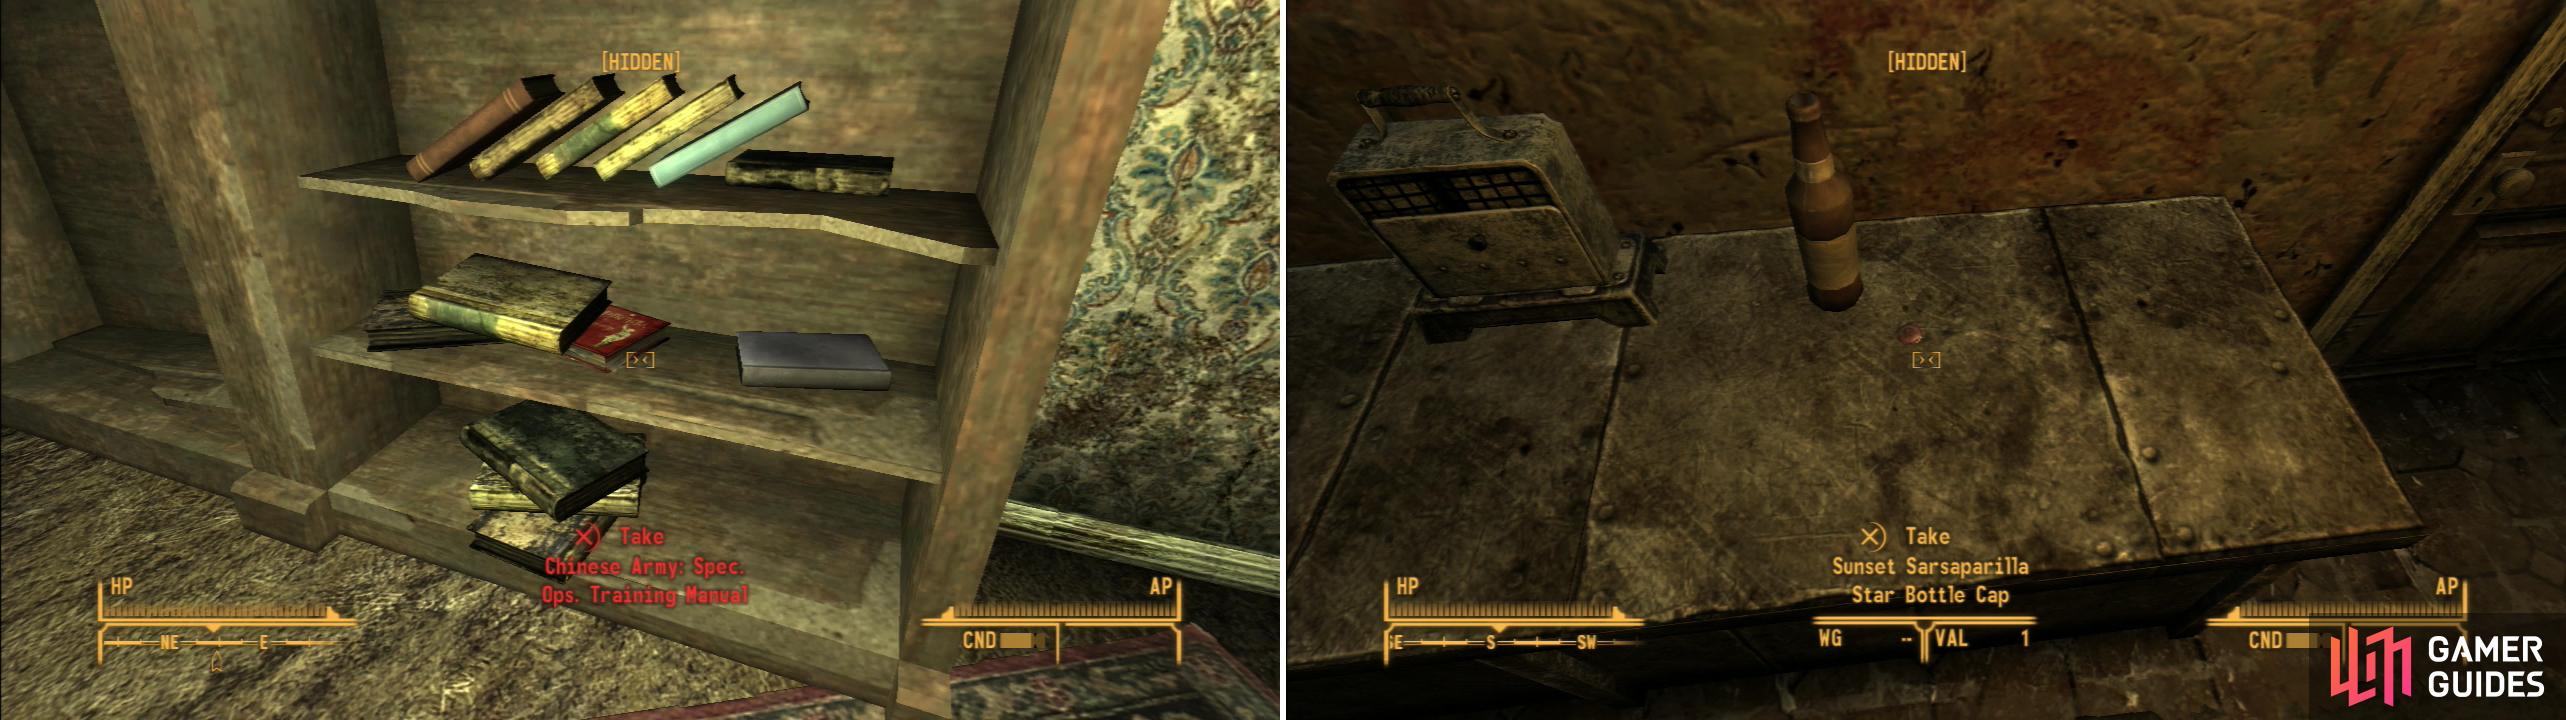 In one of the houses at Goodsprings you can find a Chinese Spec. Ops. Training Manual (left). Other, less notable loot can also be plundered from Goodsprings, too (right).